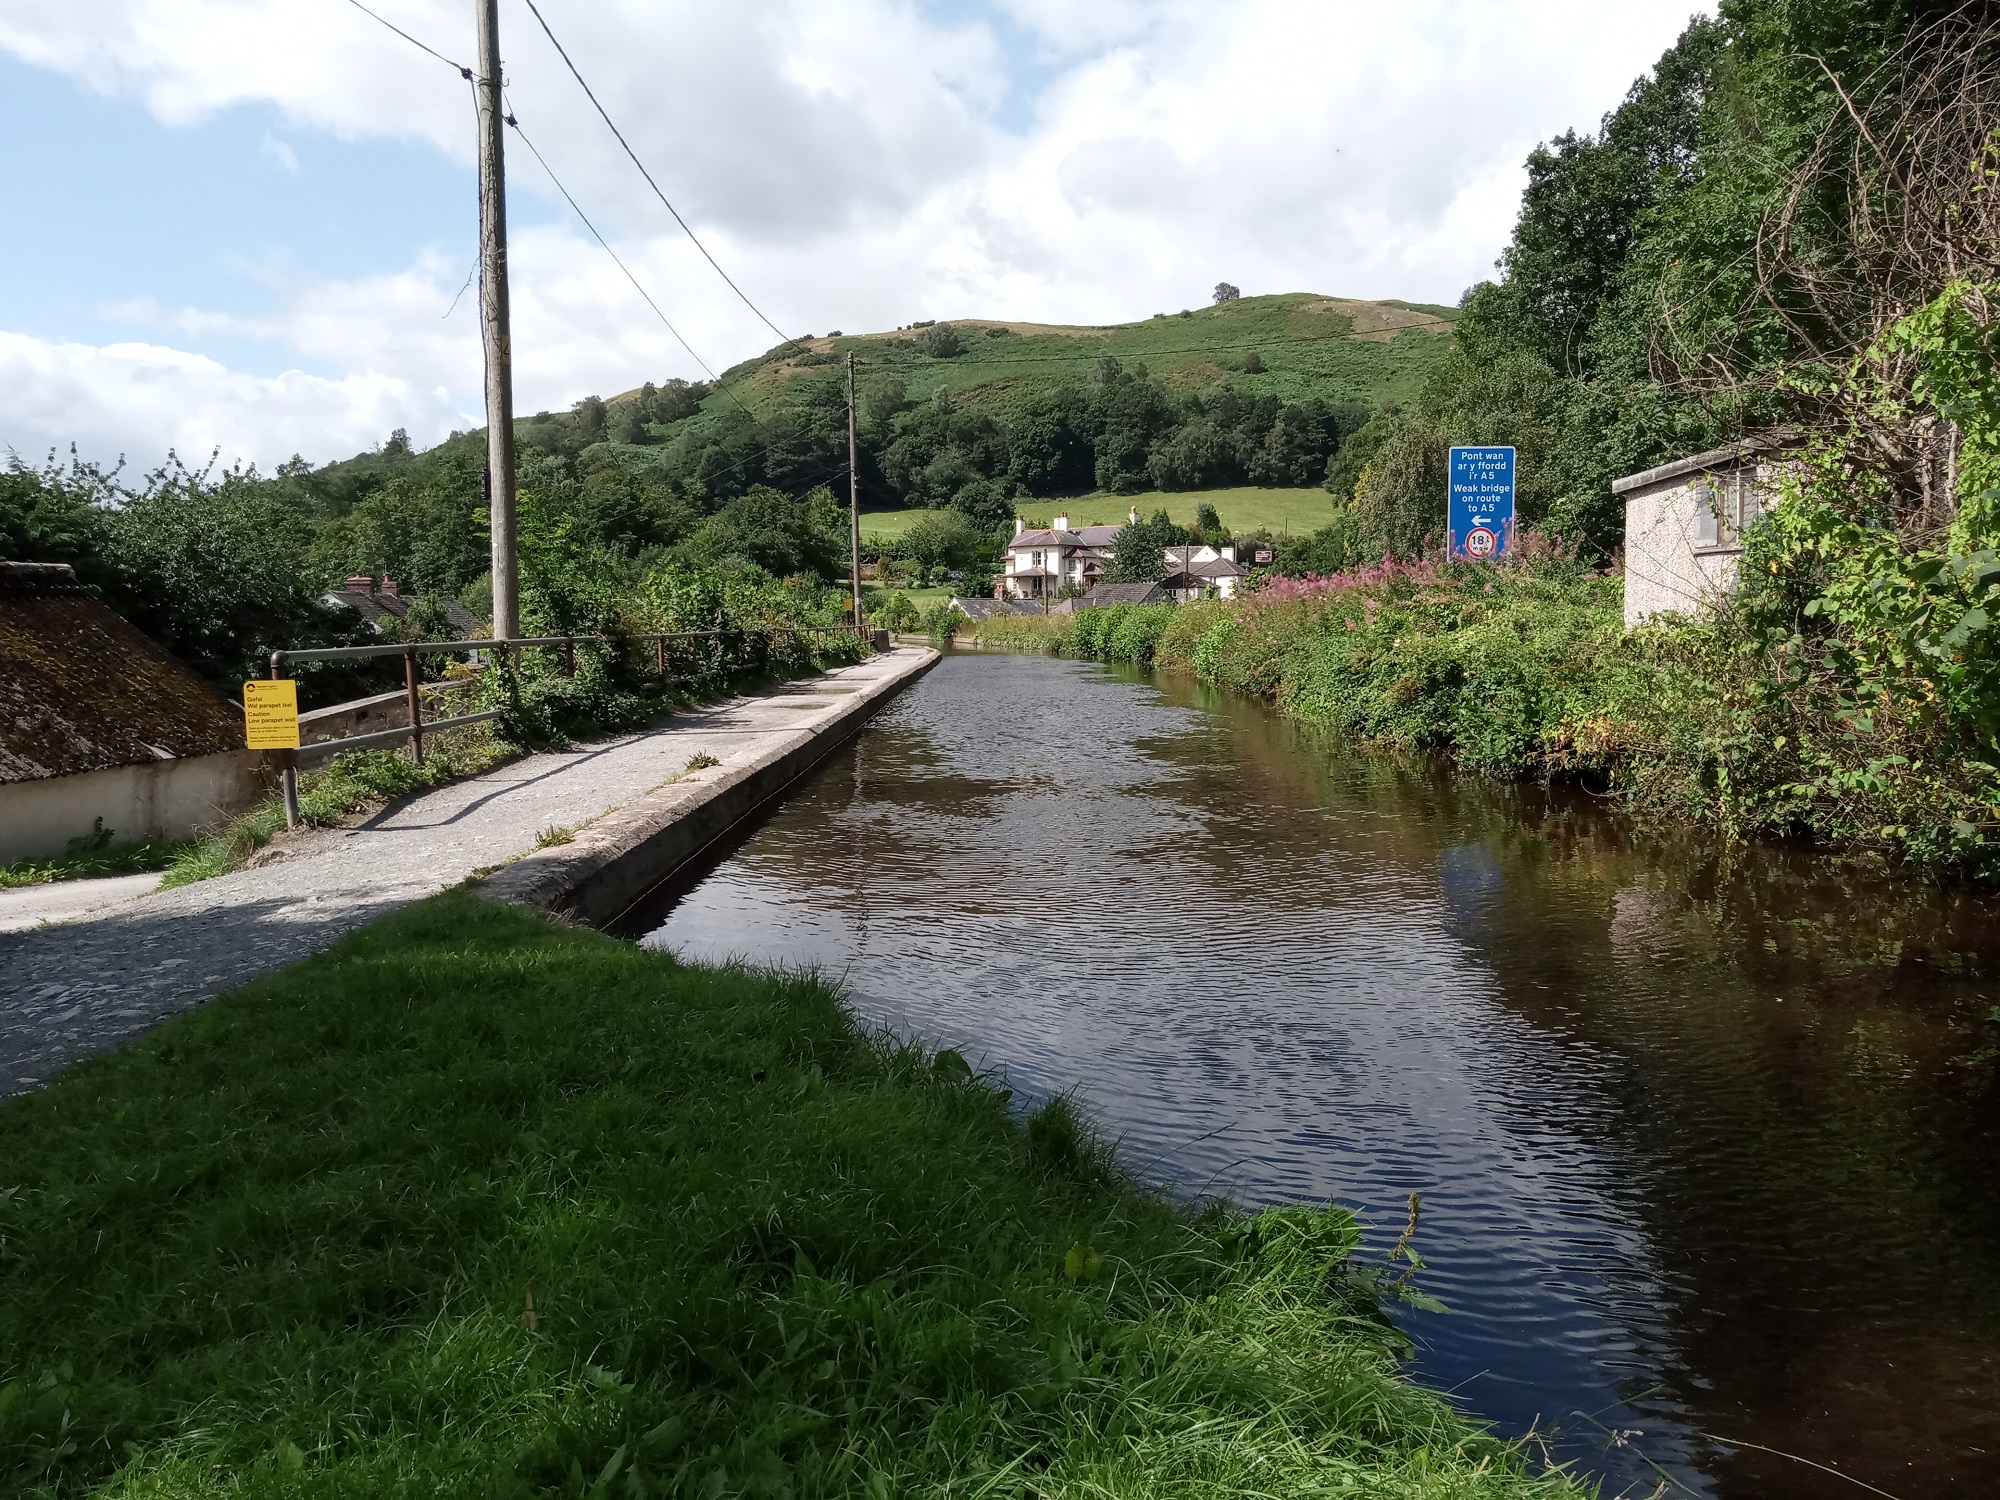 A view of the canal west of Llangollen